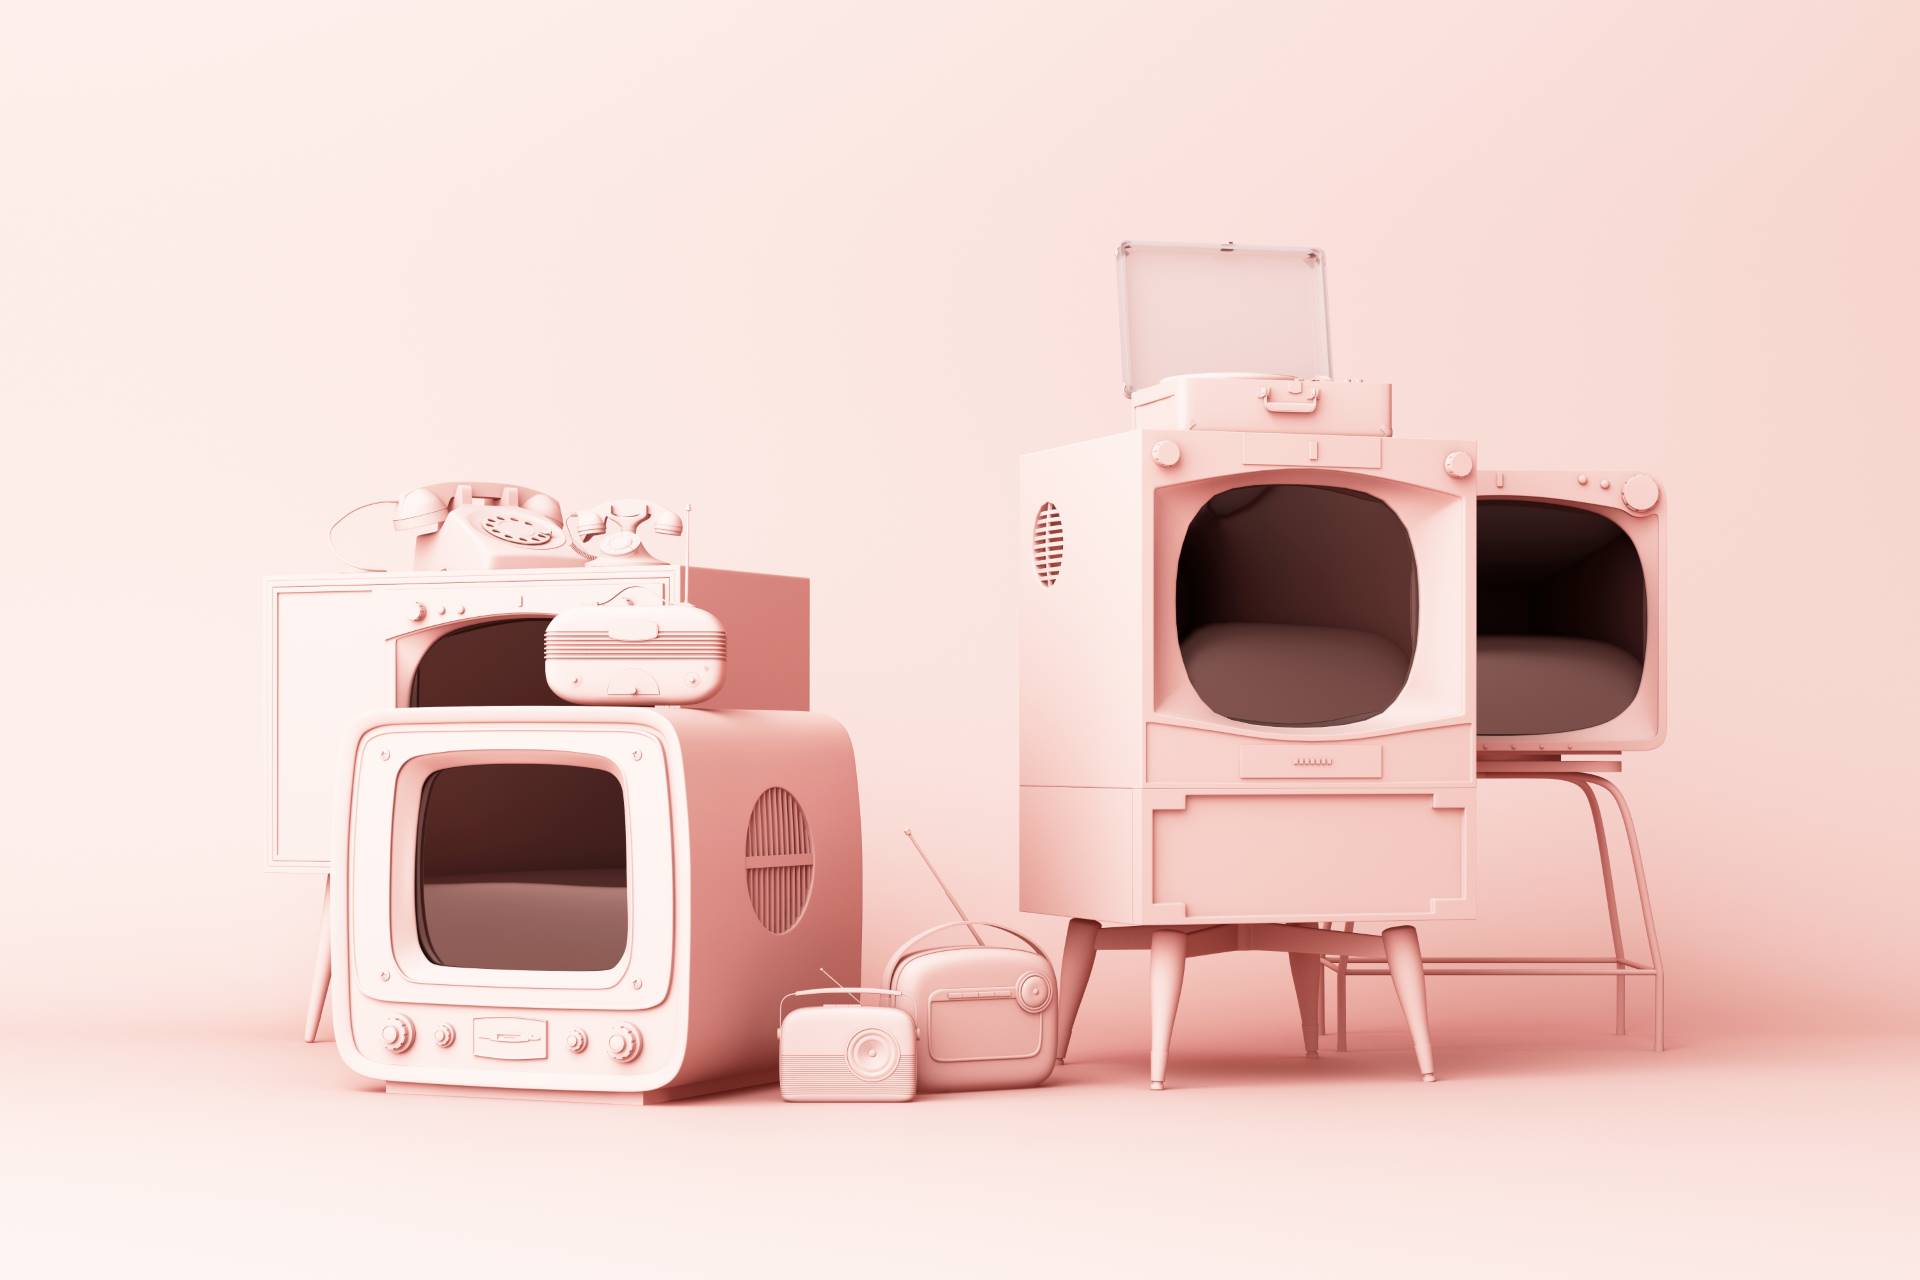 Old televisions and vintage radio player on a pink background. 3D rendering